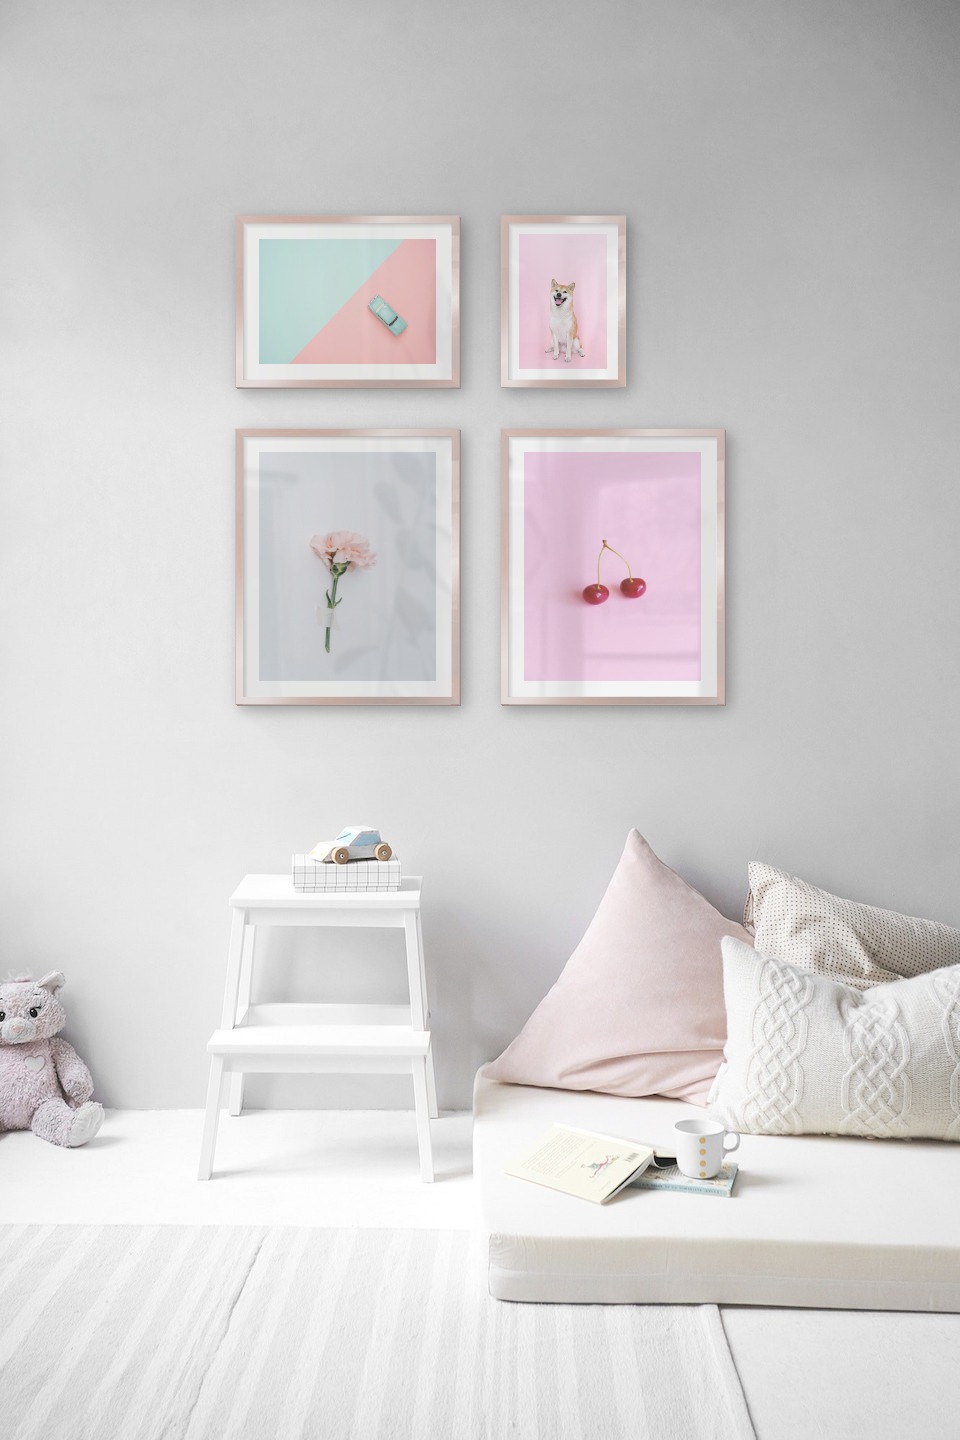 Gallery wall with picture frames in copper in sizes 40x50, 30x40 and 21x30 with prints "Pink flower", "Cherries and pink", "Blue car and pink" and "Dog"